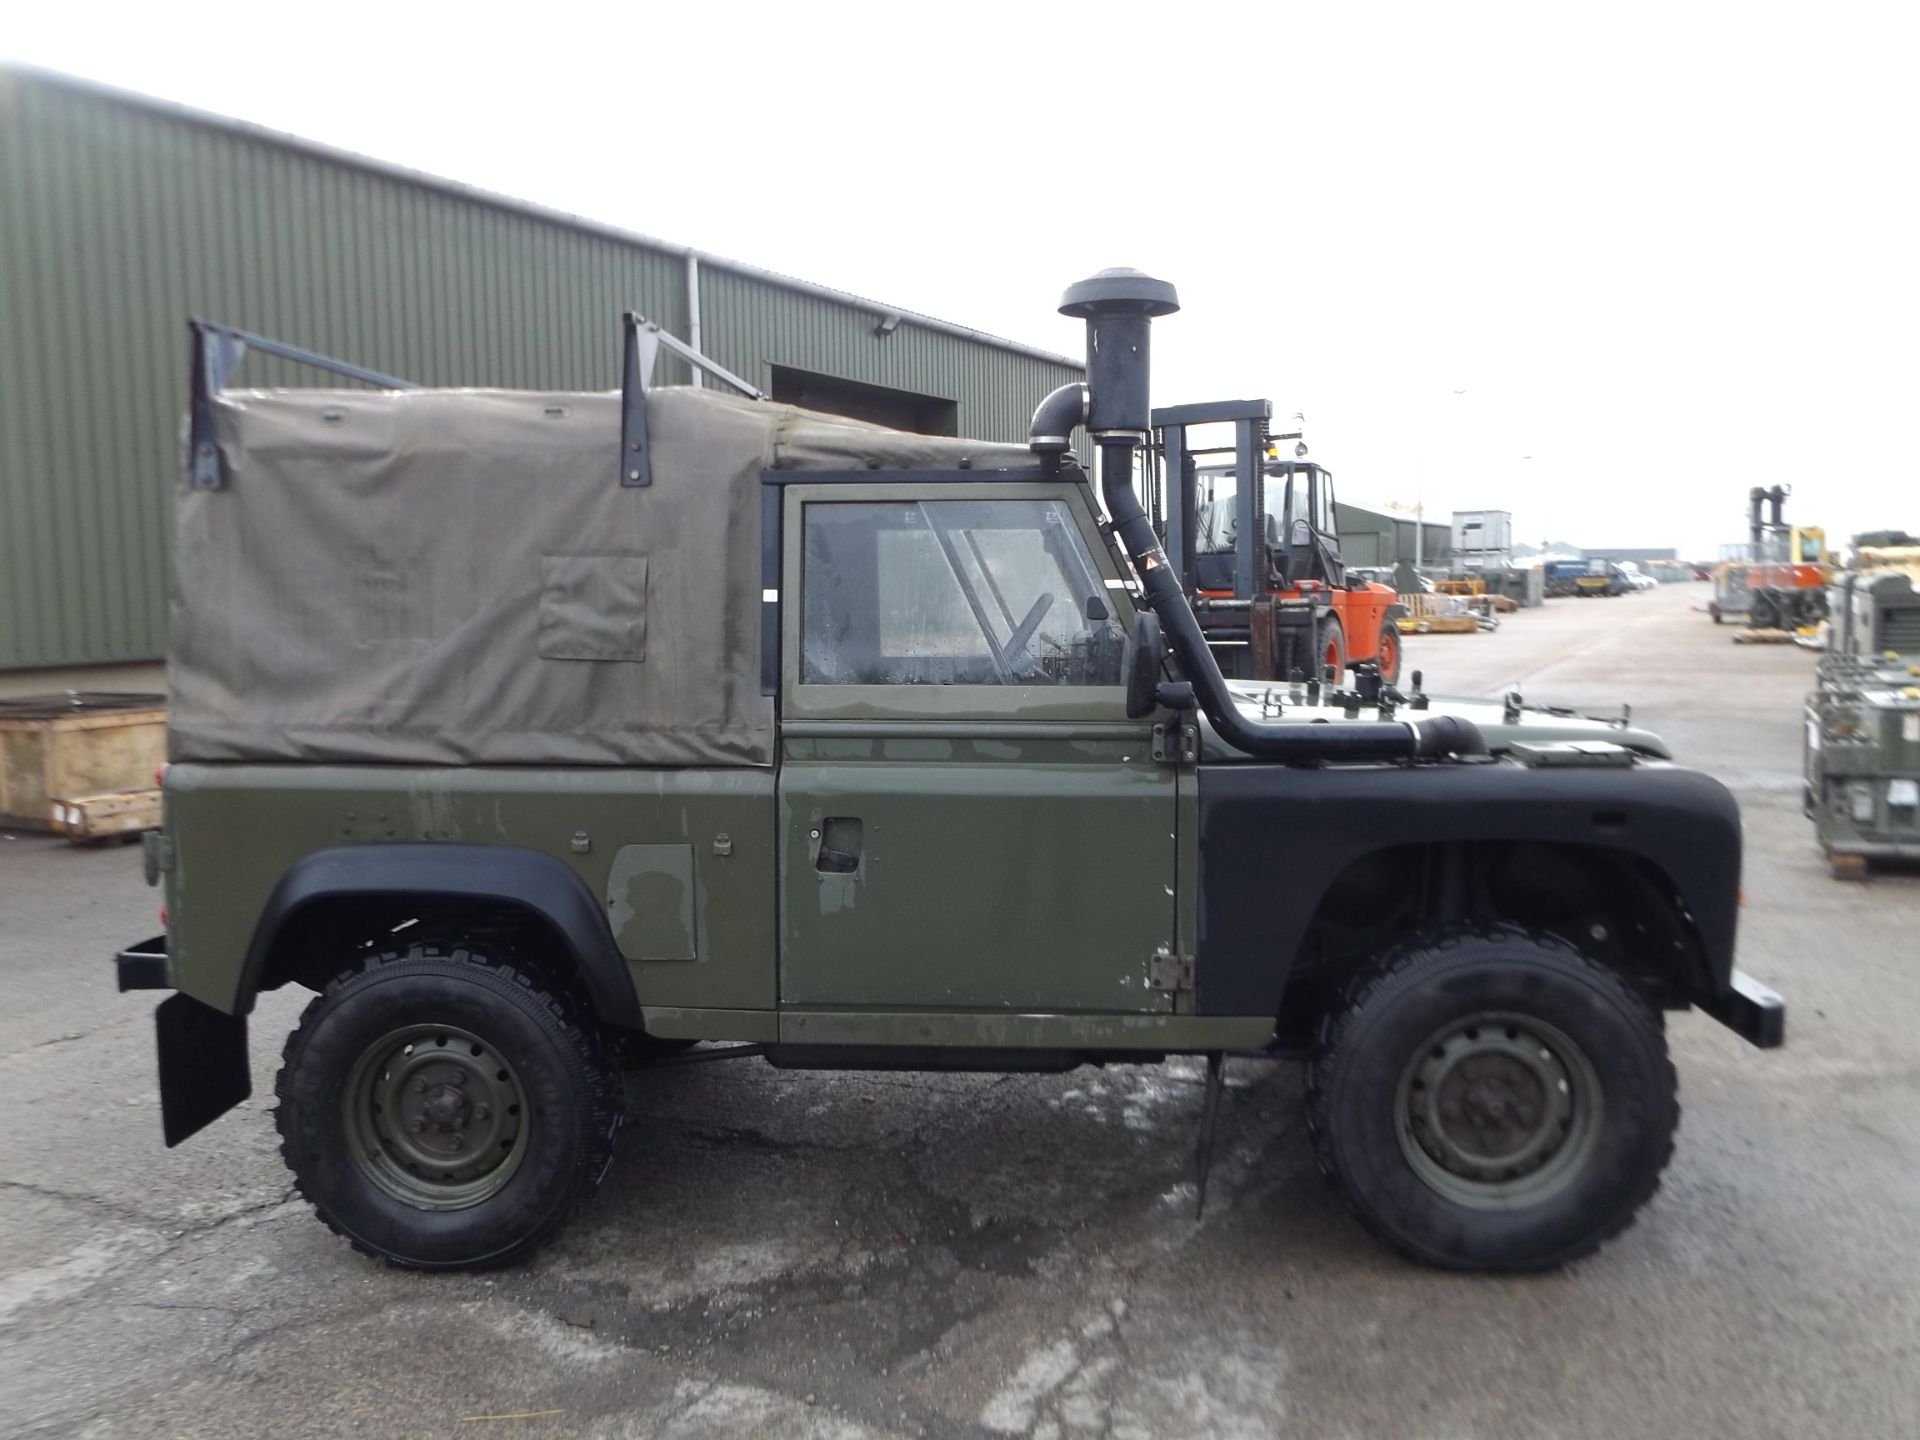 Very Rare Royal Marines Winter/Water Land Rover Wolf 90 Soft Top - Image 5 of 25